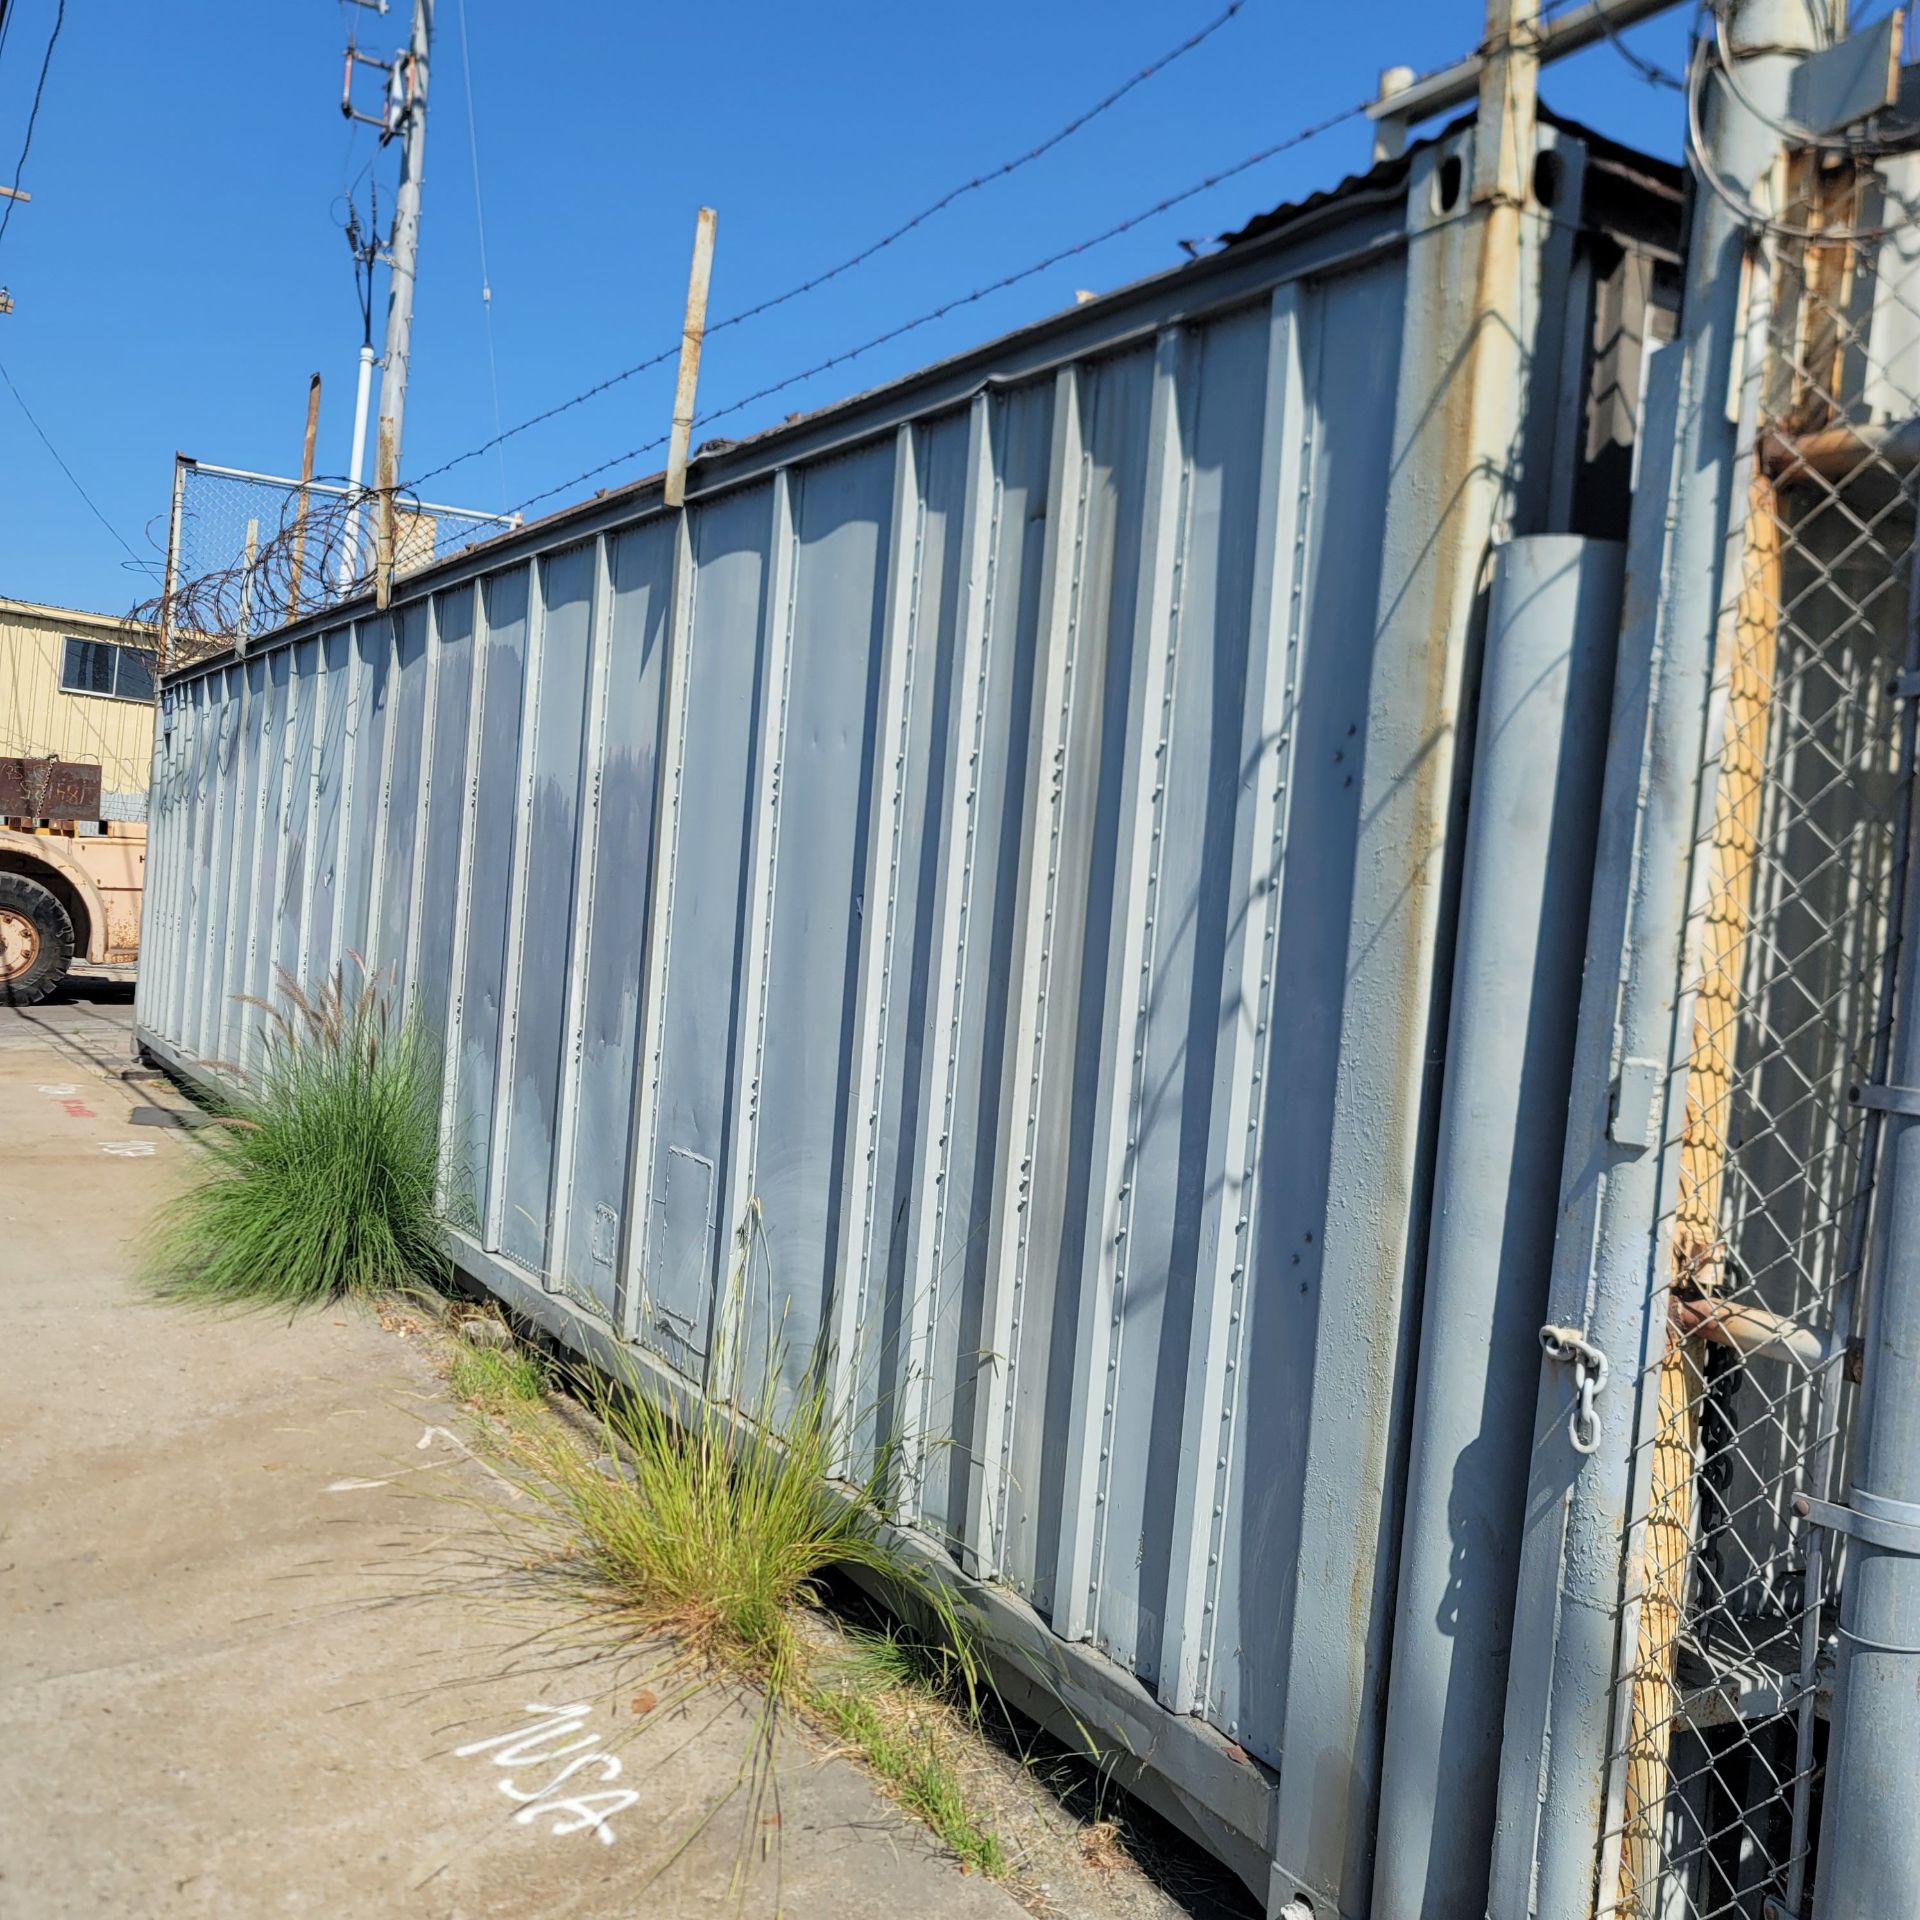 40' SHIPPING CONTAINER, EMPTY - Image 2 of 2